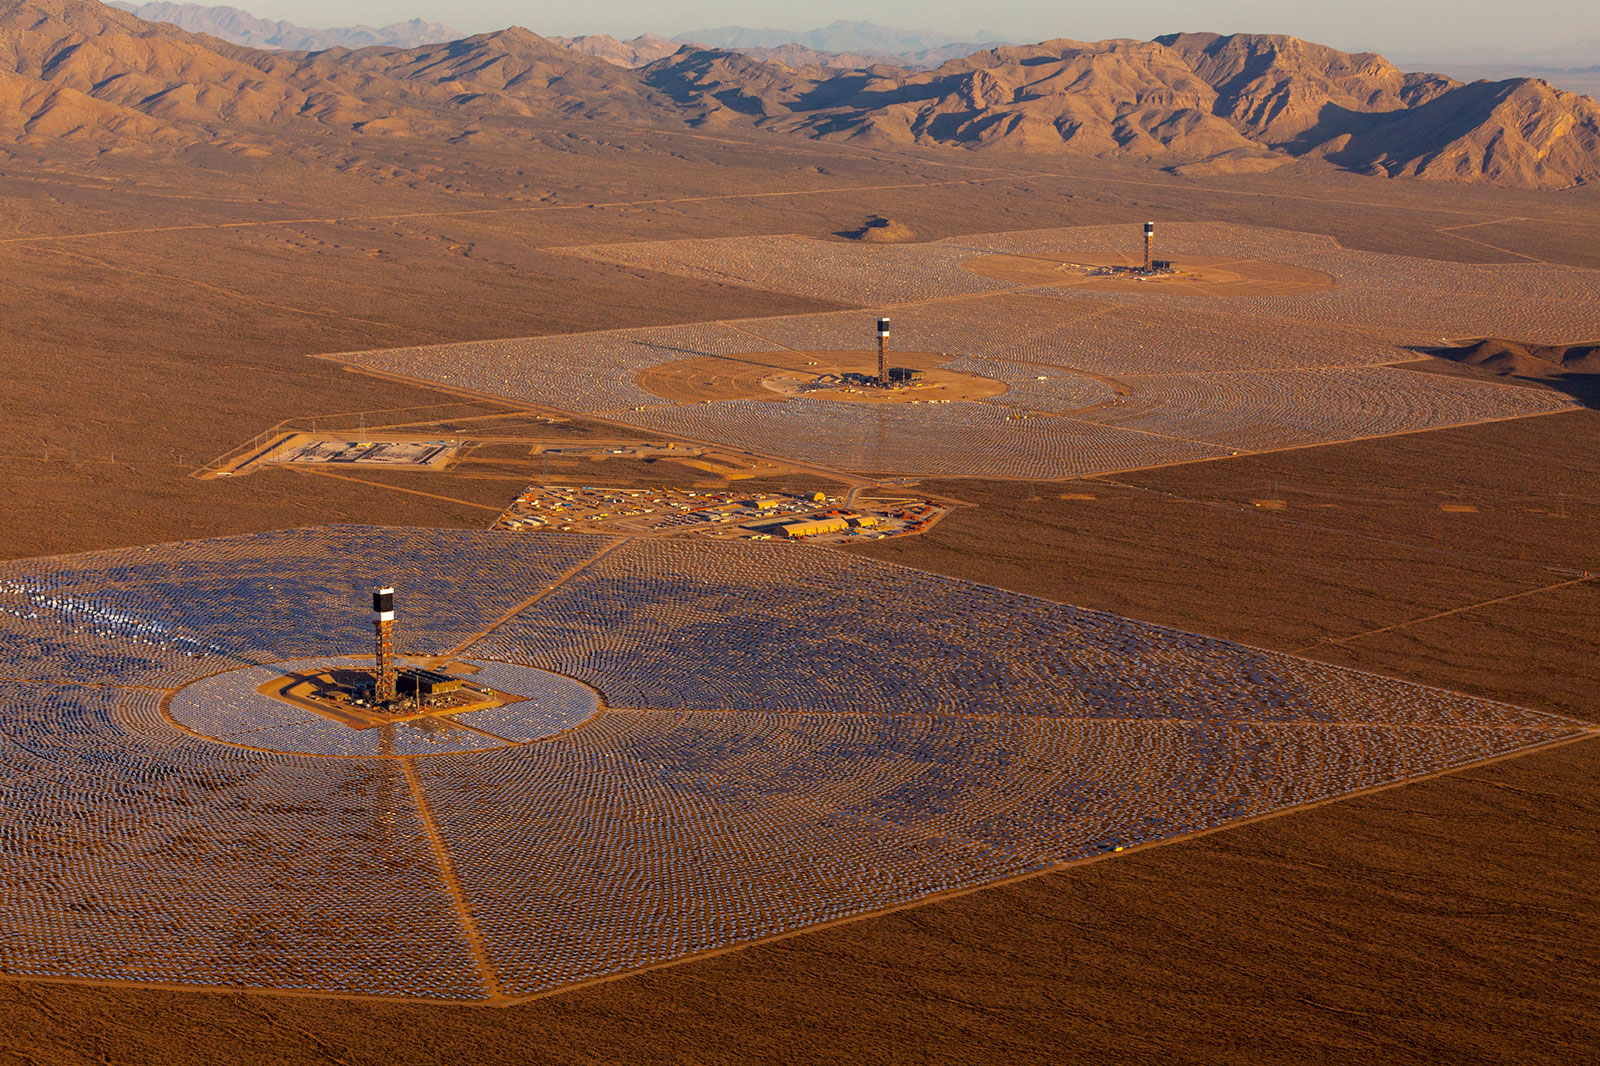 World's largest solar plant, located near the California and Nevada border